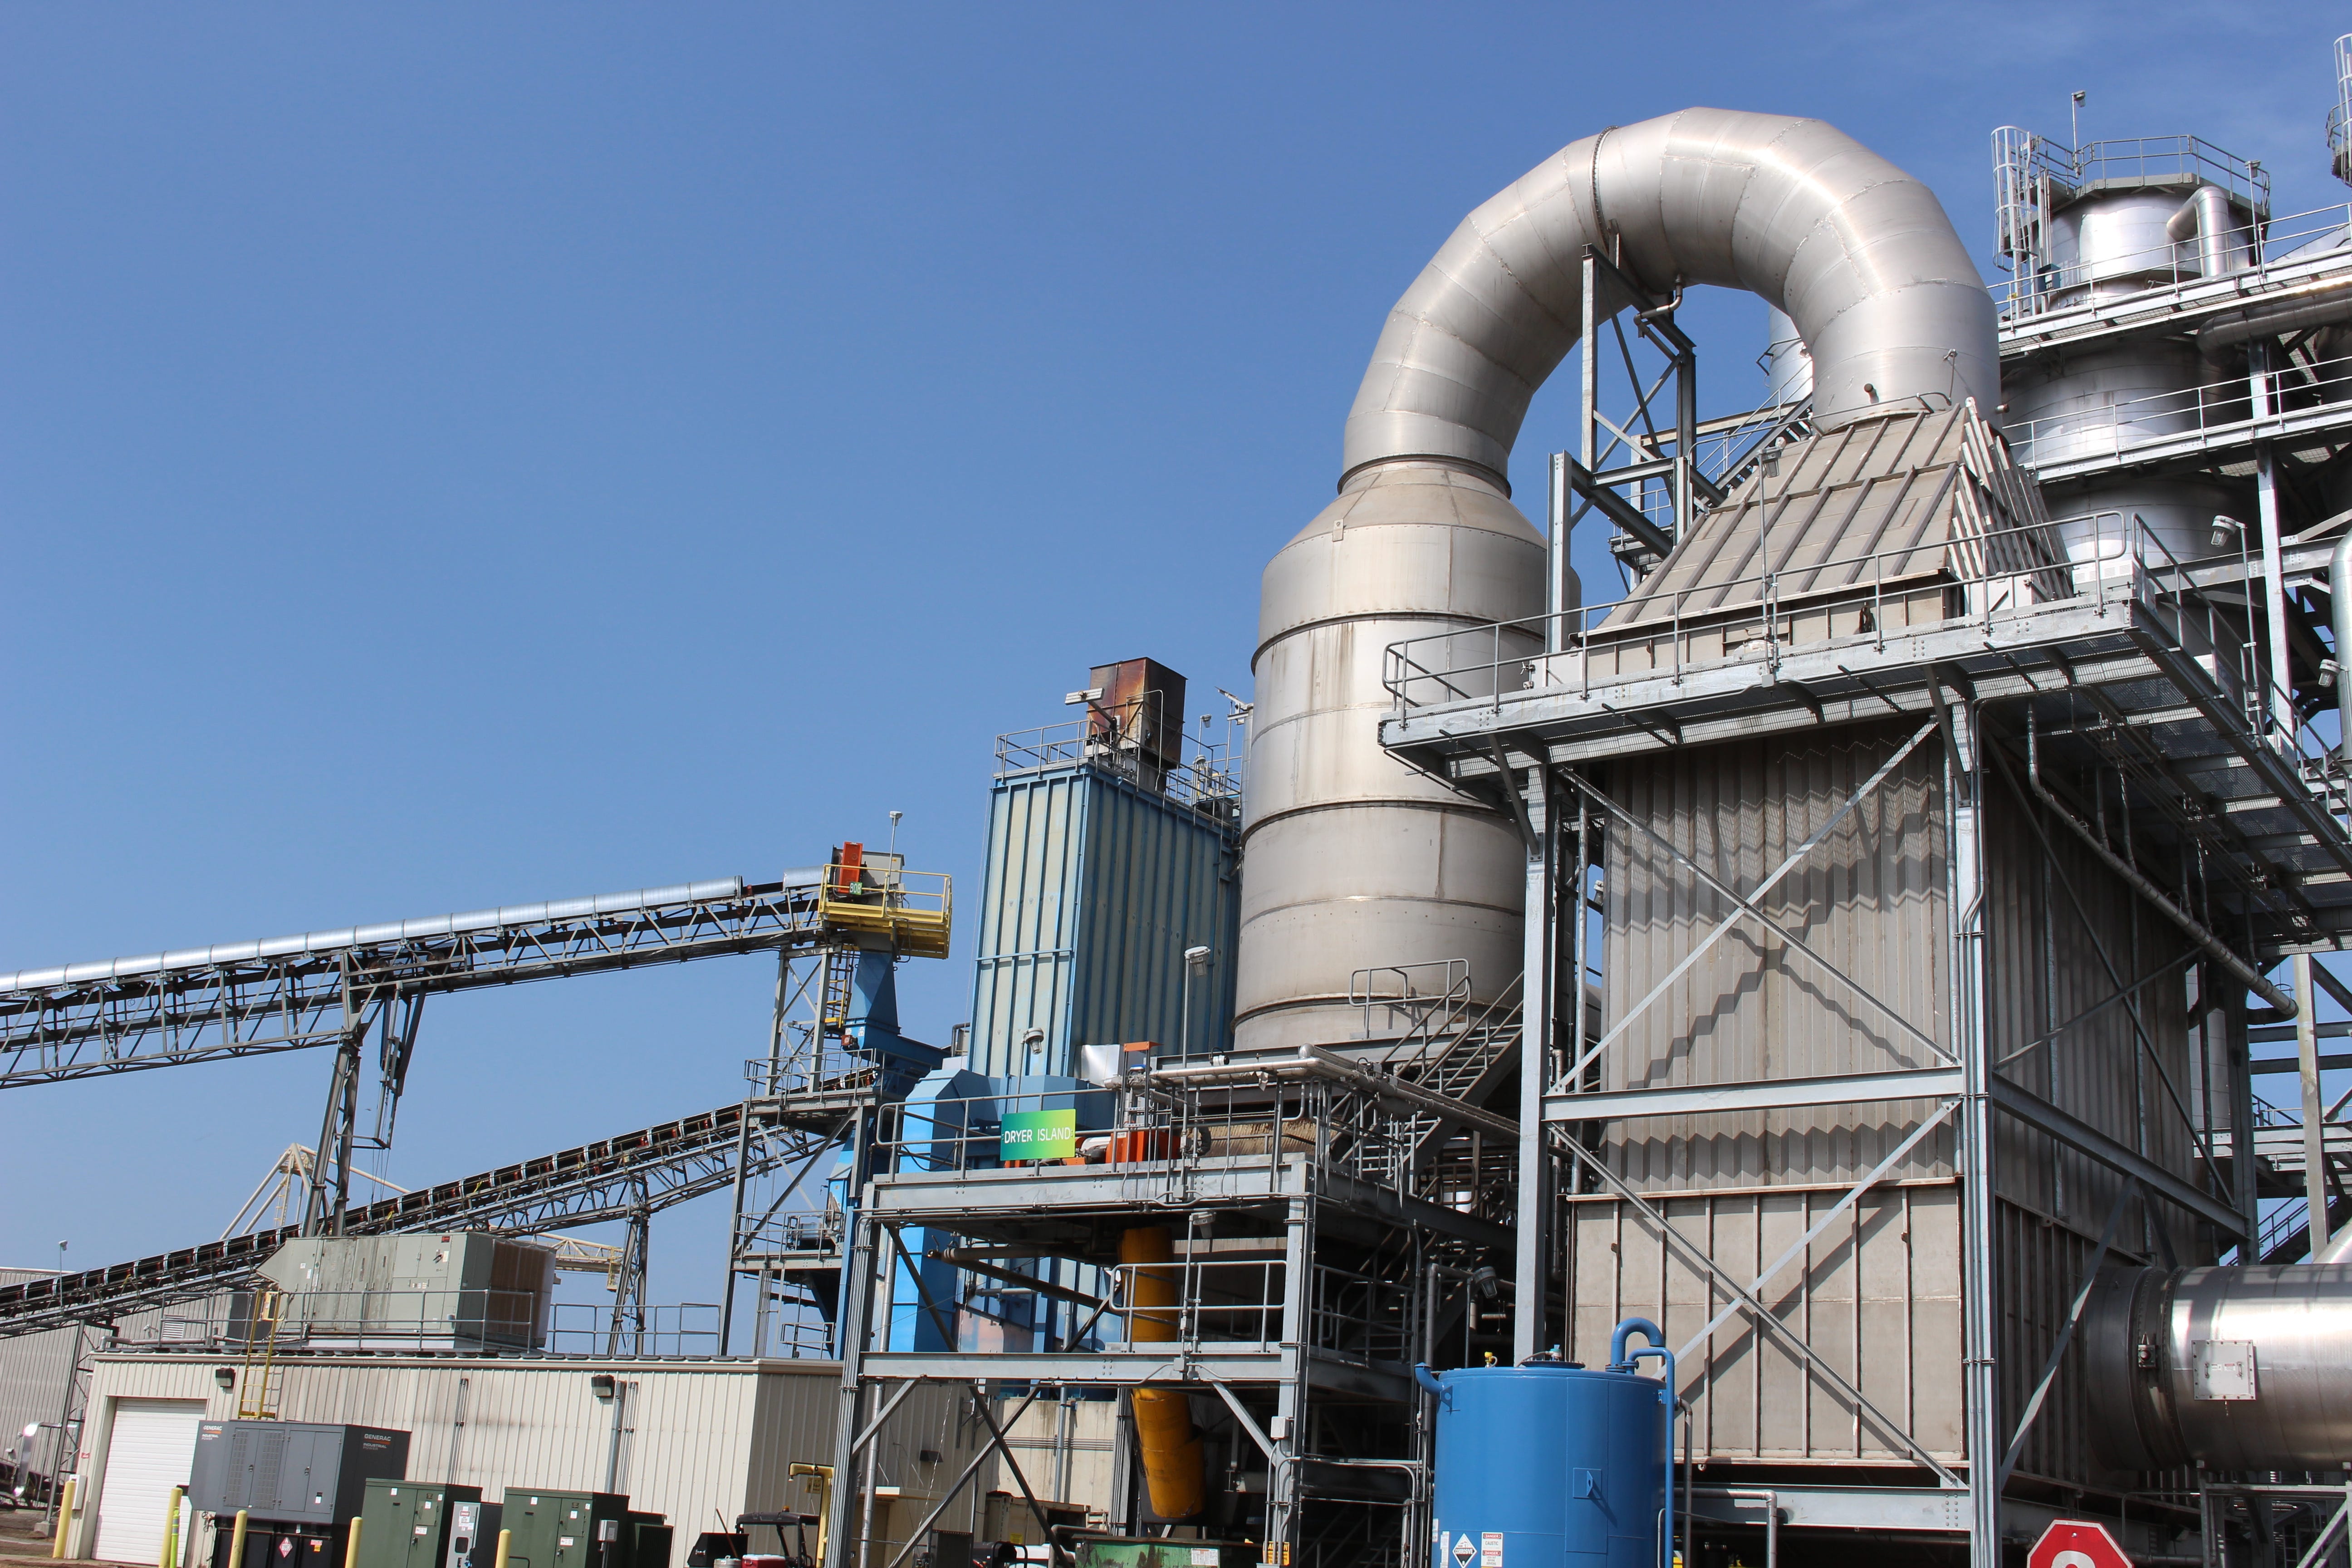 Drax Biomass converts pine timber and sawmill residual fiber into biomass pellets that are used to generate power in the United Kingdom. Hammermills reduce the size of wood chips.